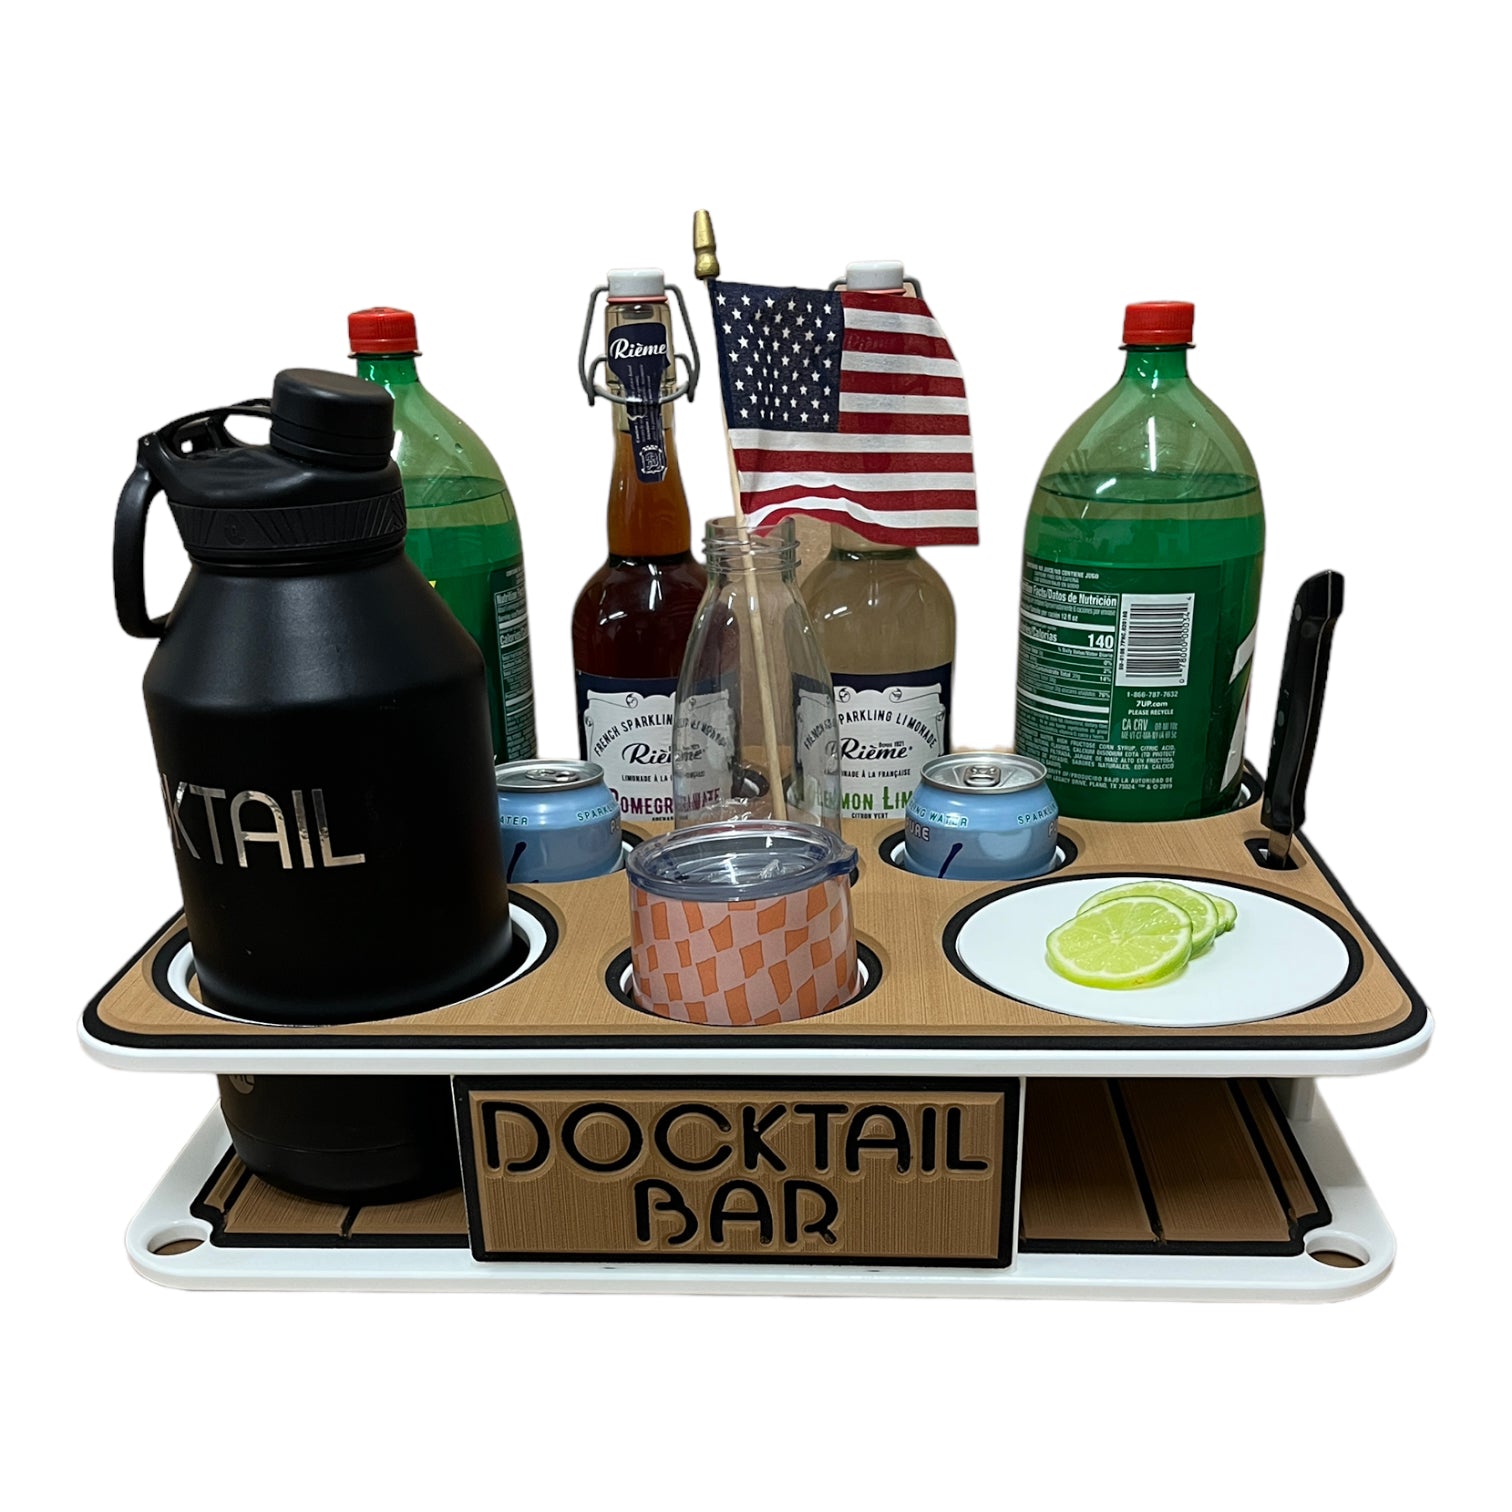 The Docktail Boat Table Caddy plus Custom Serving / Bait Table with Pontoon  Rail